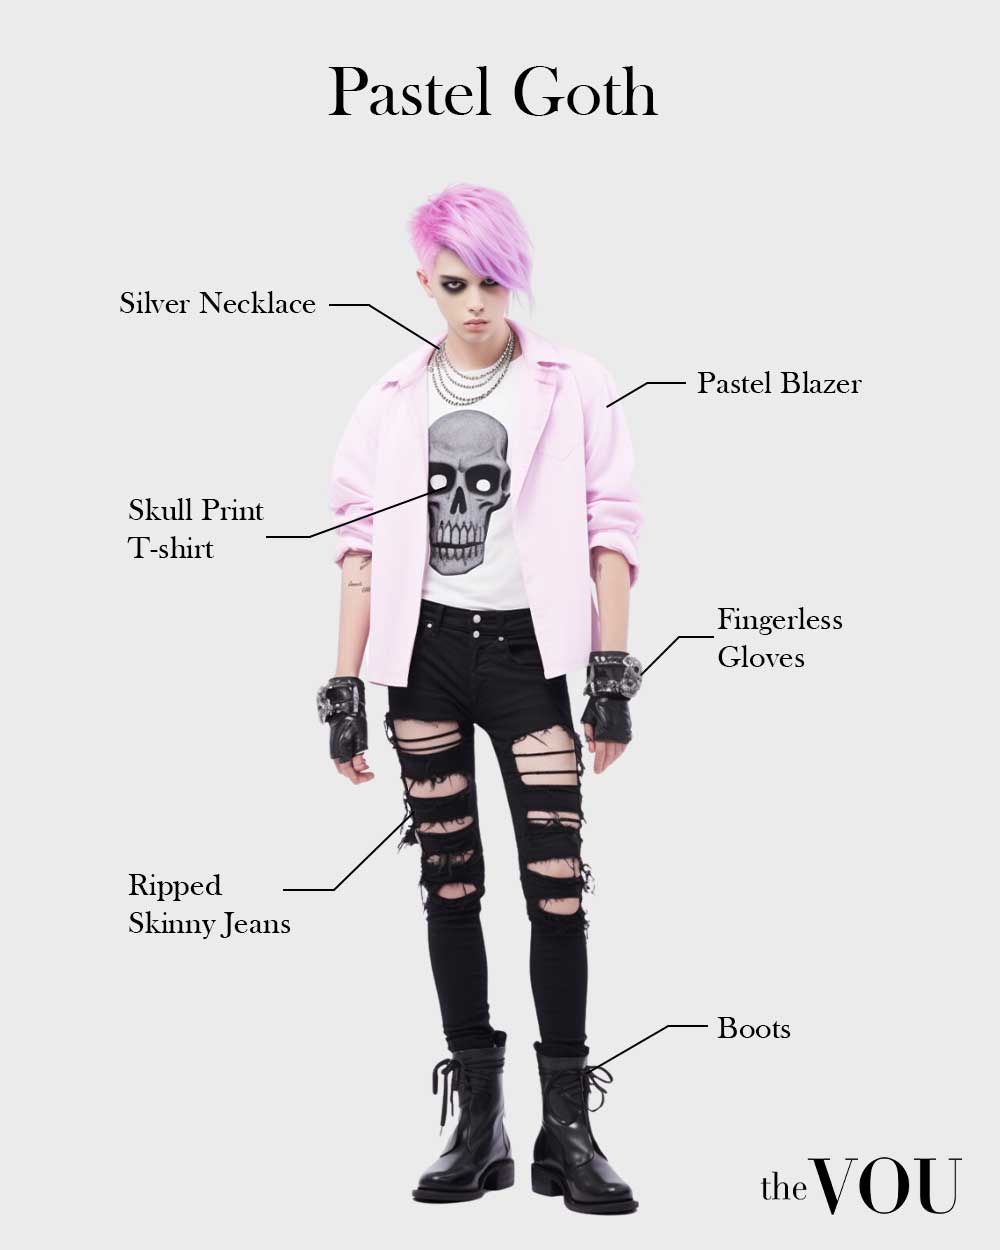 Pastel Goth outfit elements